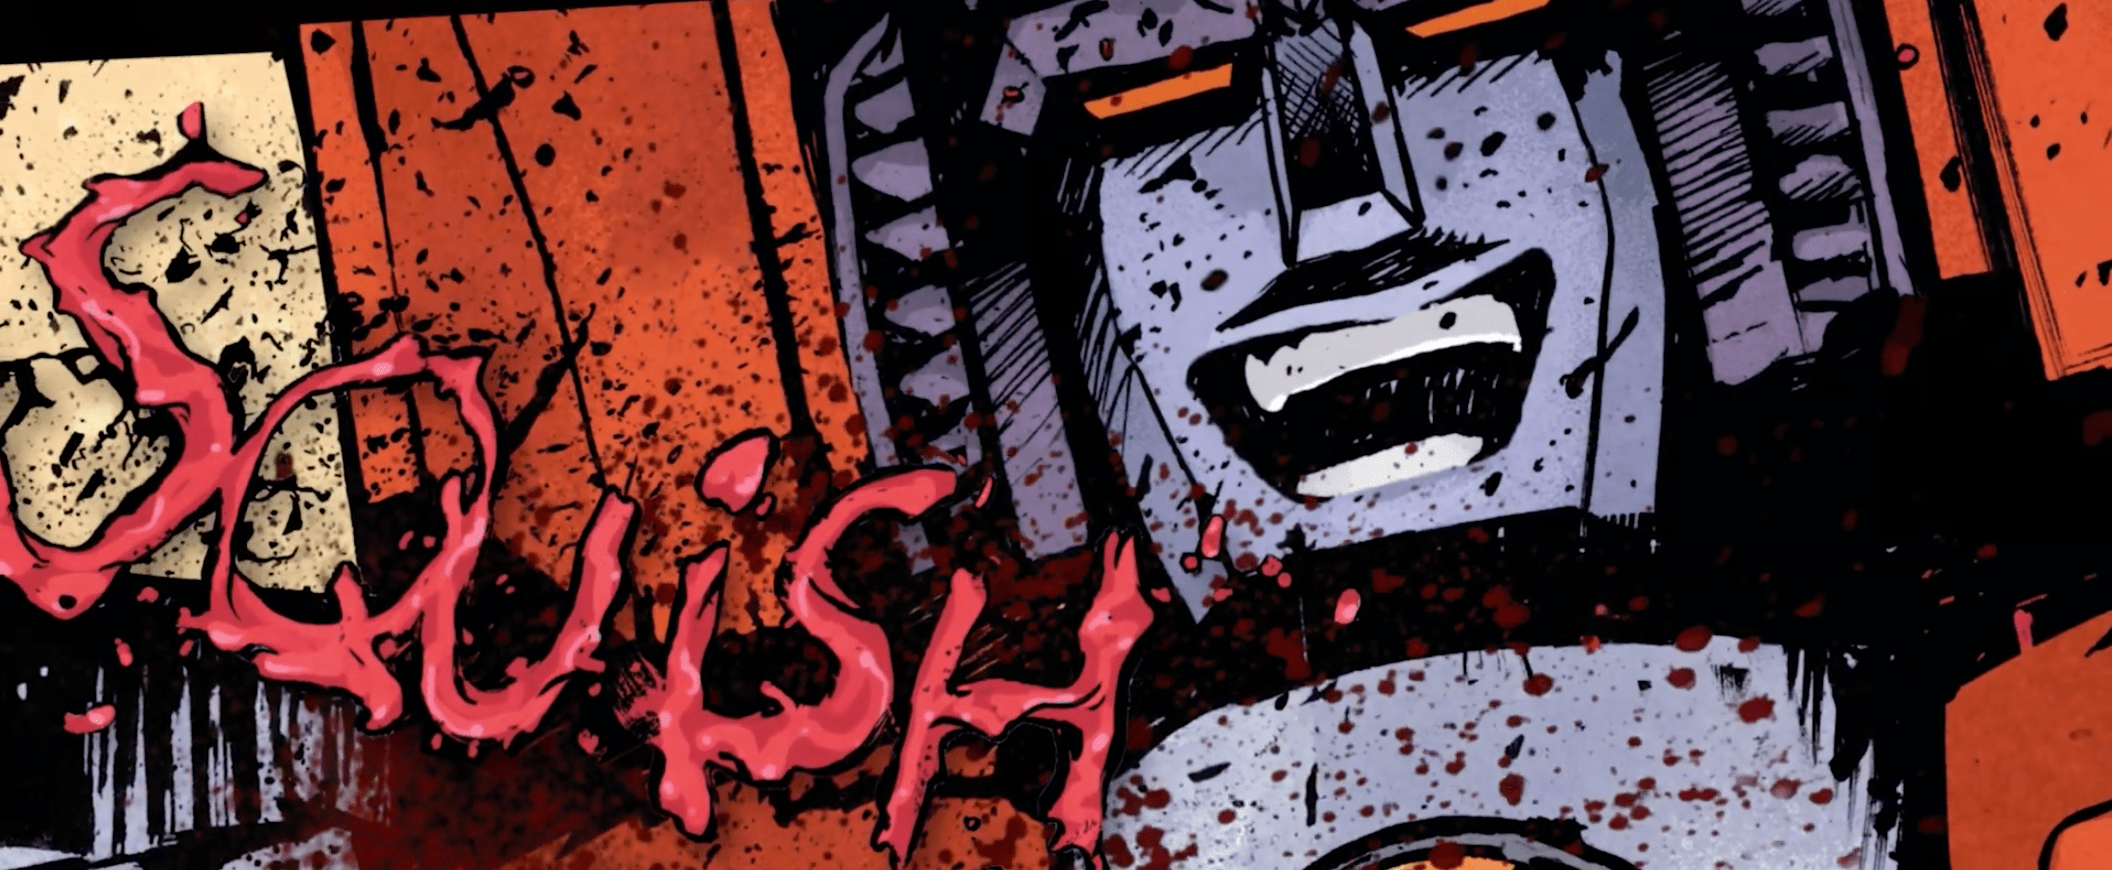 Watch Skybound 'Energon Universe' trailer featuring Transformers and G.I. Joe stories